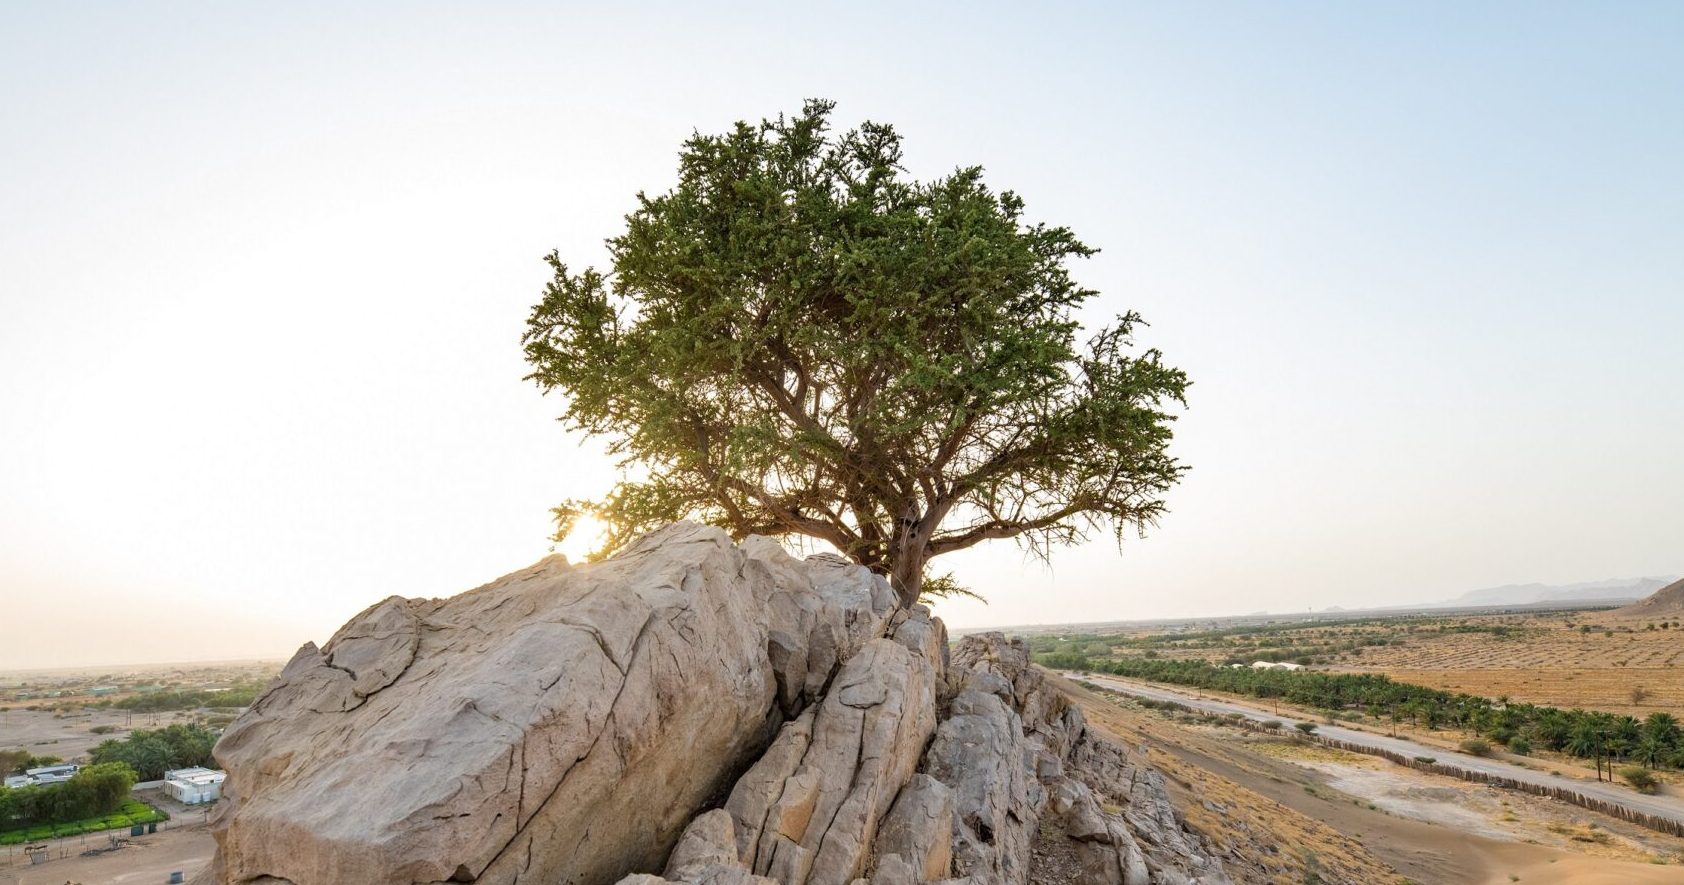 100 year-old tree discovered in Abu Dhabi